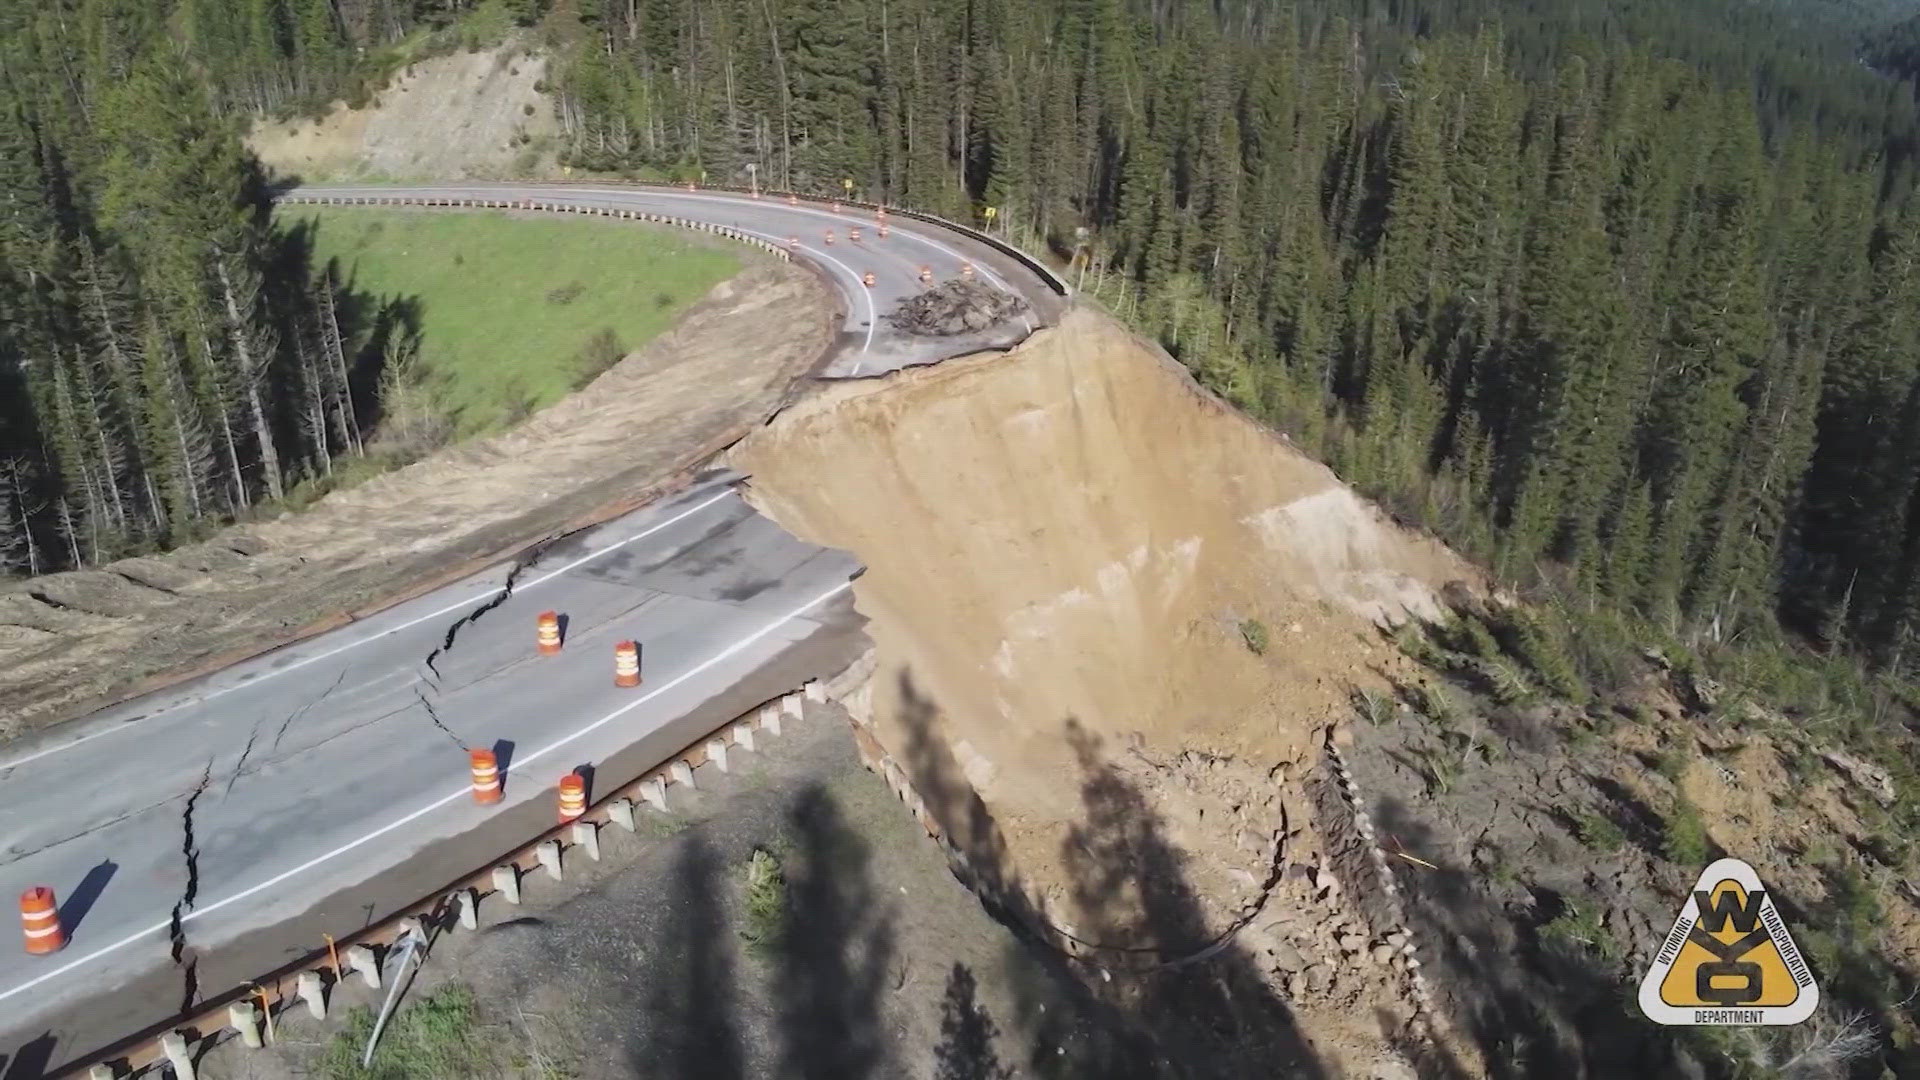 Aerial photos and drone video of the collapse show the Teton Pass road riven with deep cracks, and a big section of the pavement disappeared altogether.